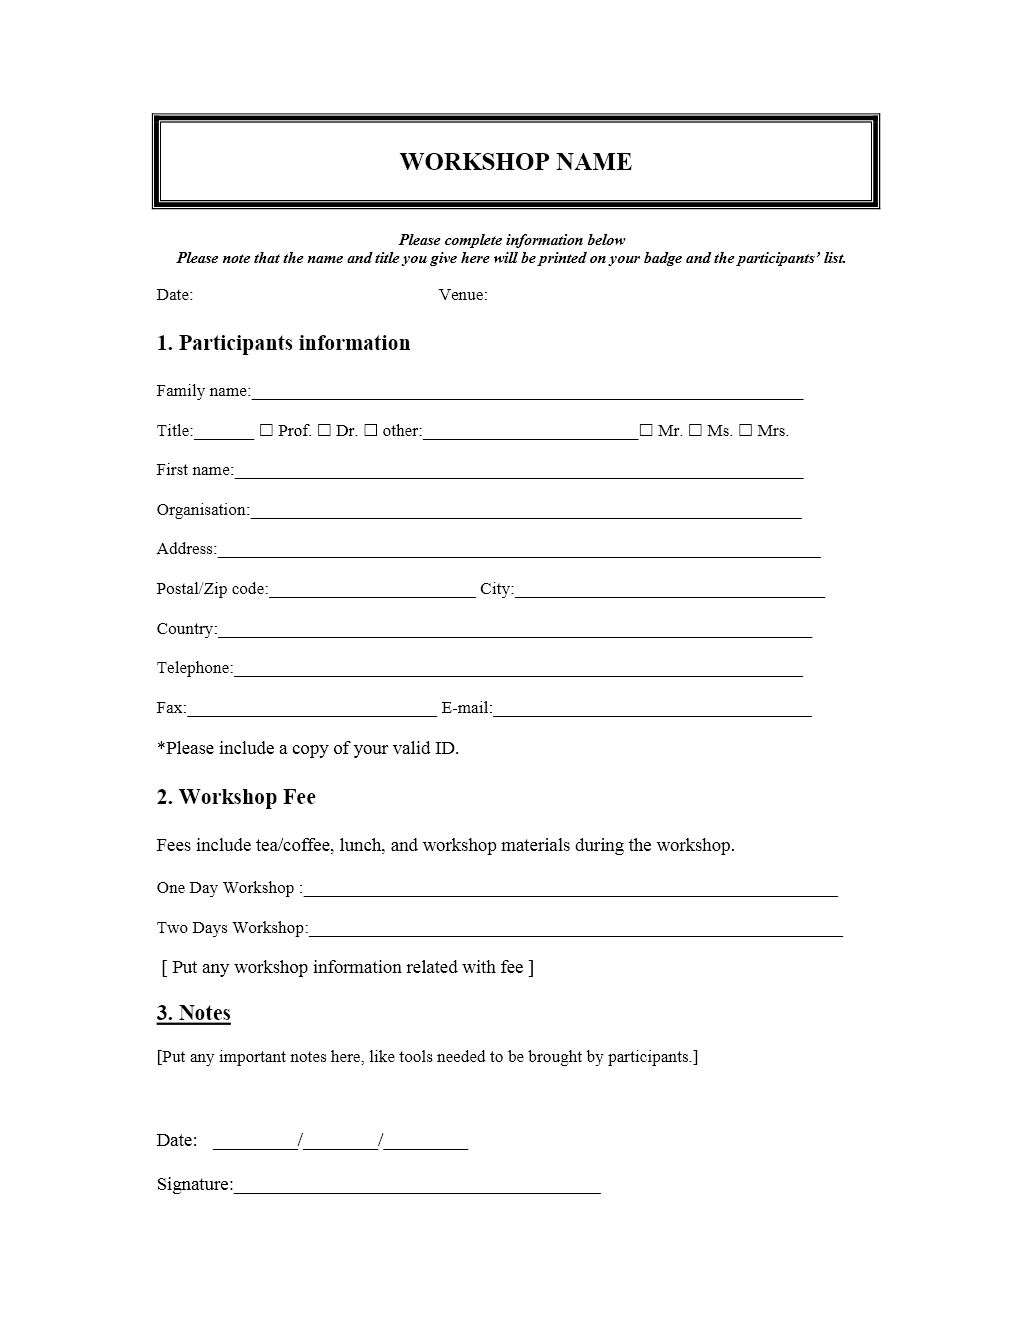 registration form template   April.onthemarch.co